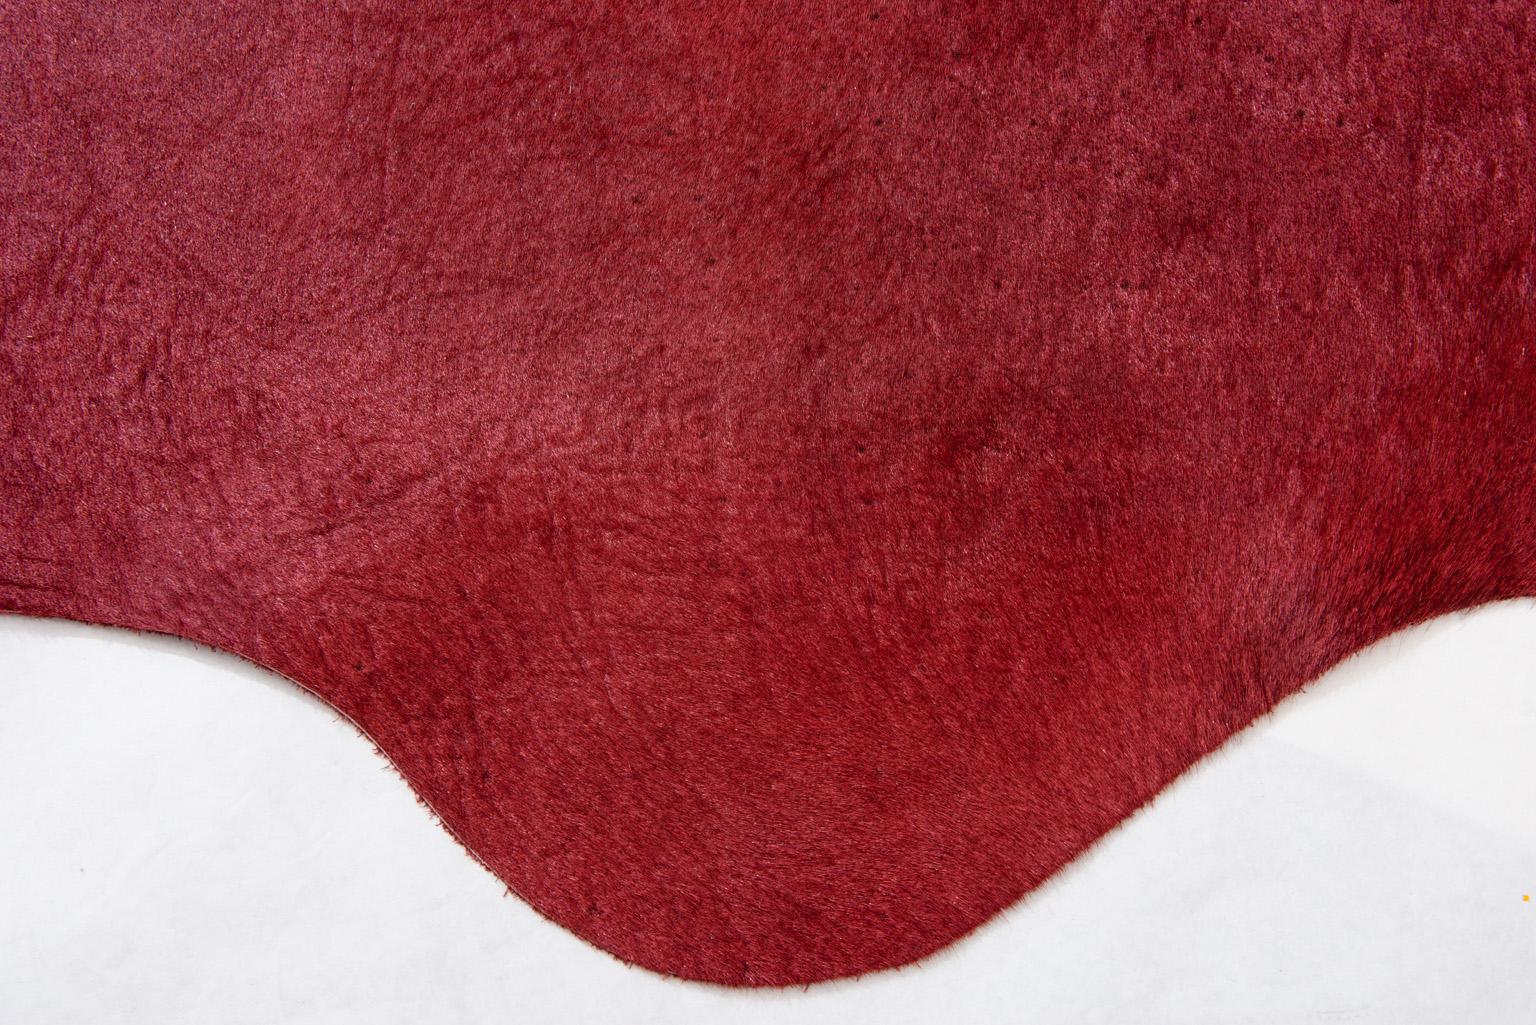 Contemporary Leather Carpet Red Colored